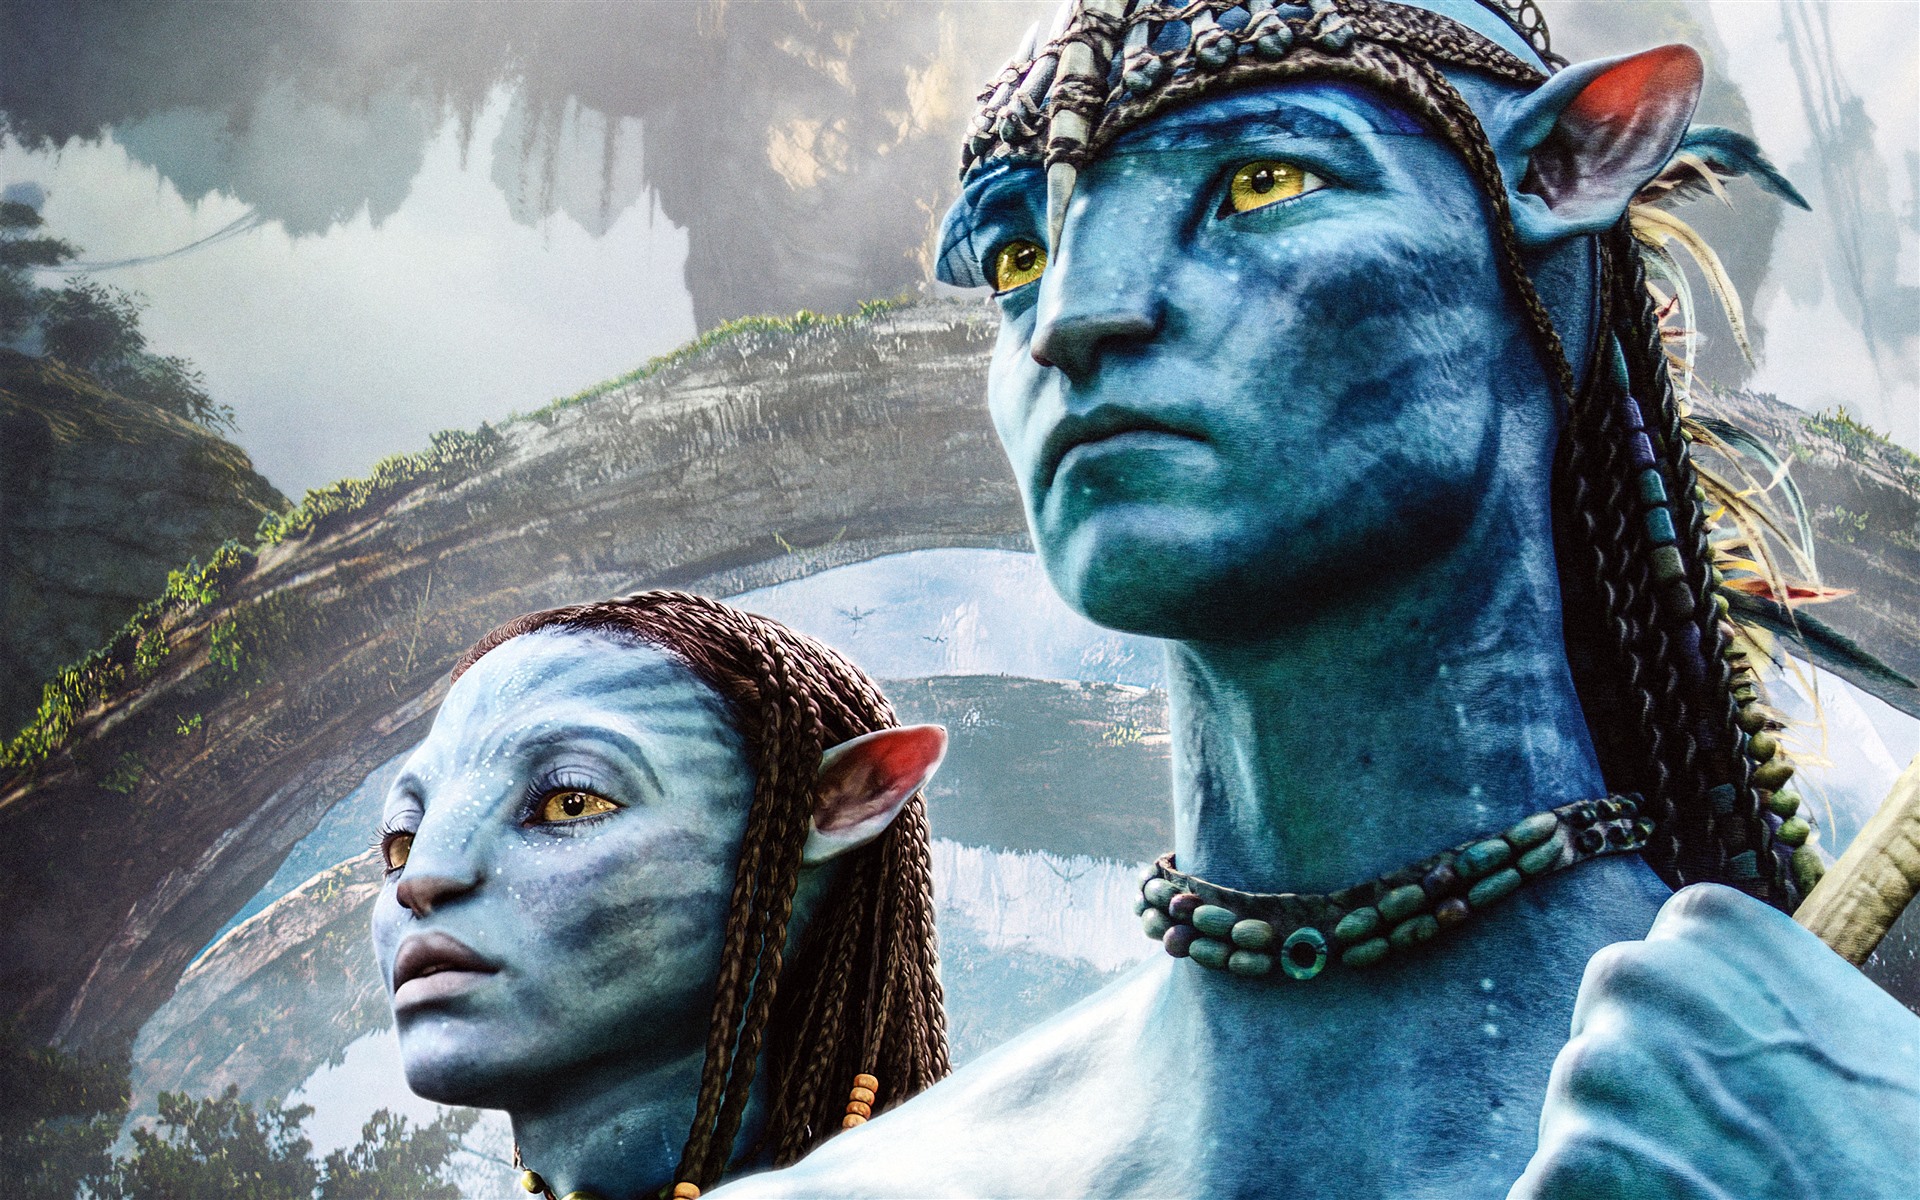 Avatar 2 The Way of Water film image 1920x1200